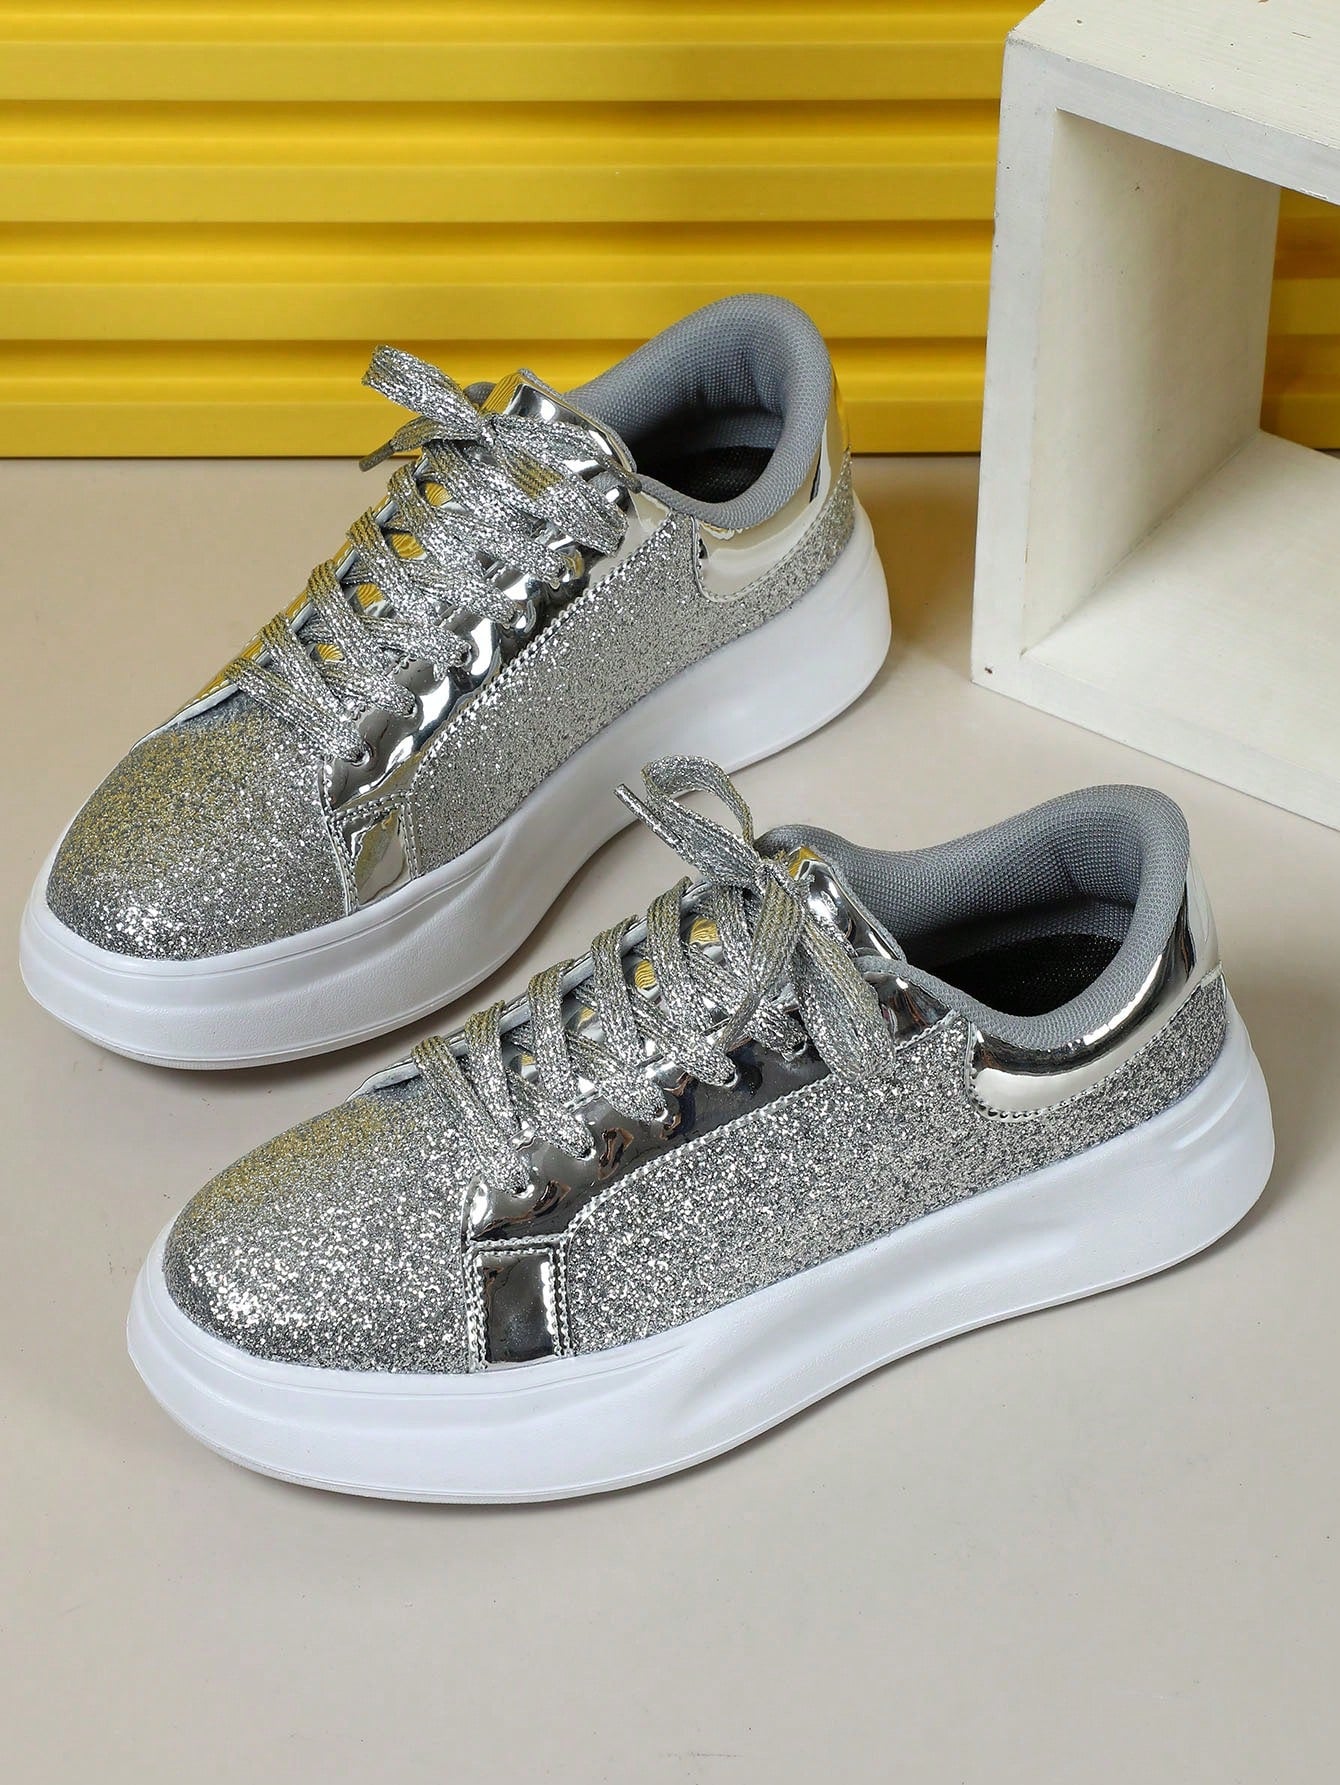 Comfortable And Simple Fashionable Outdoor Walking Casual Shoes City Series Versatile Shoelace Xercise Travel Flat Shoes Round Toe Glitter Low-Cut Color Block Festival Gift Men's Sports Shoes